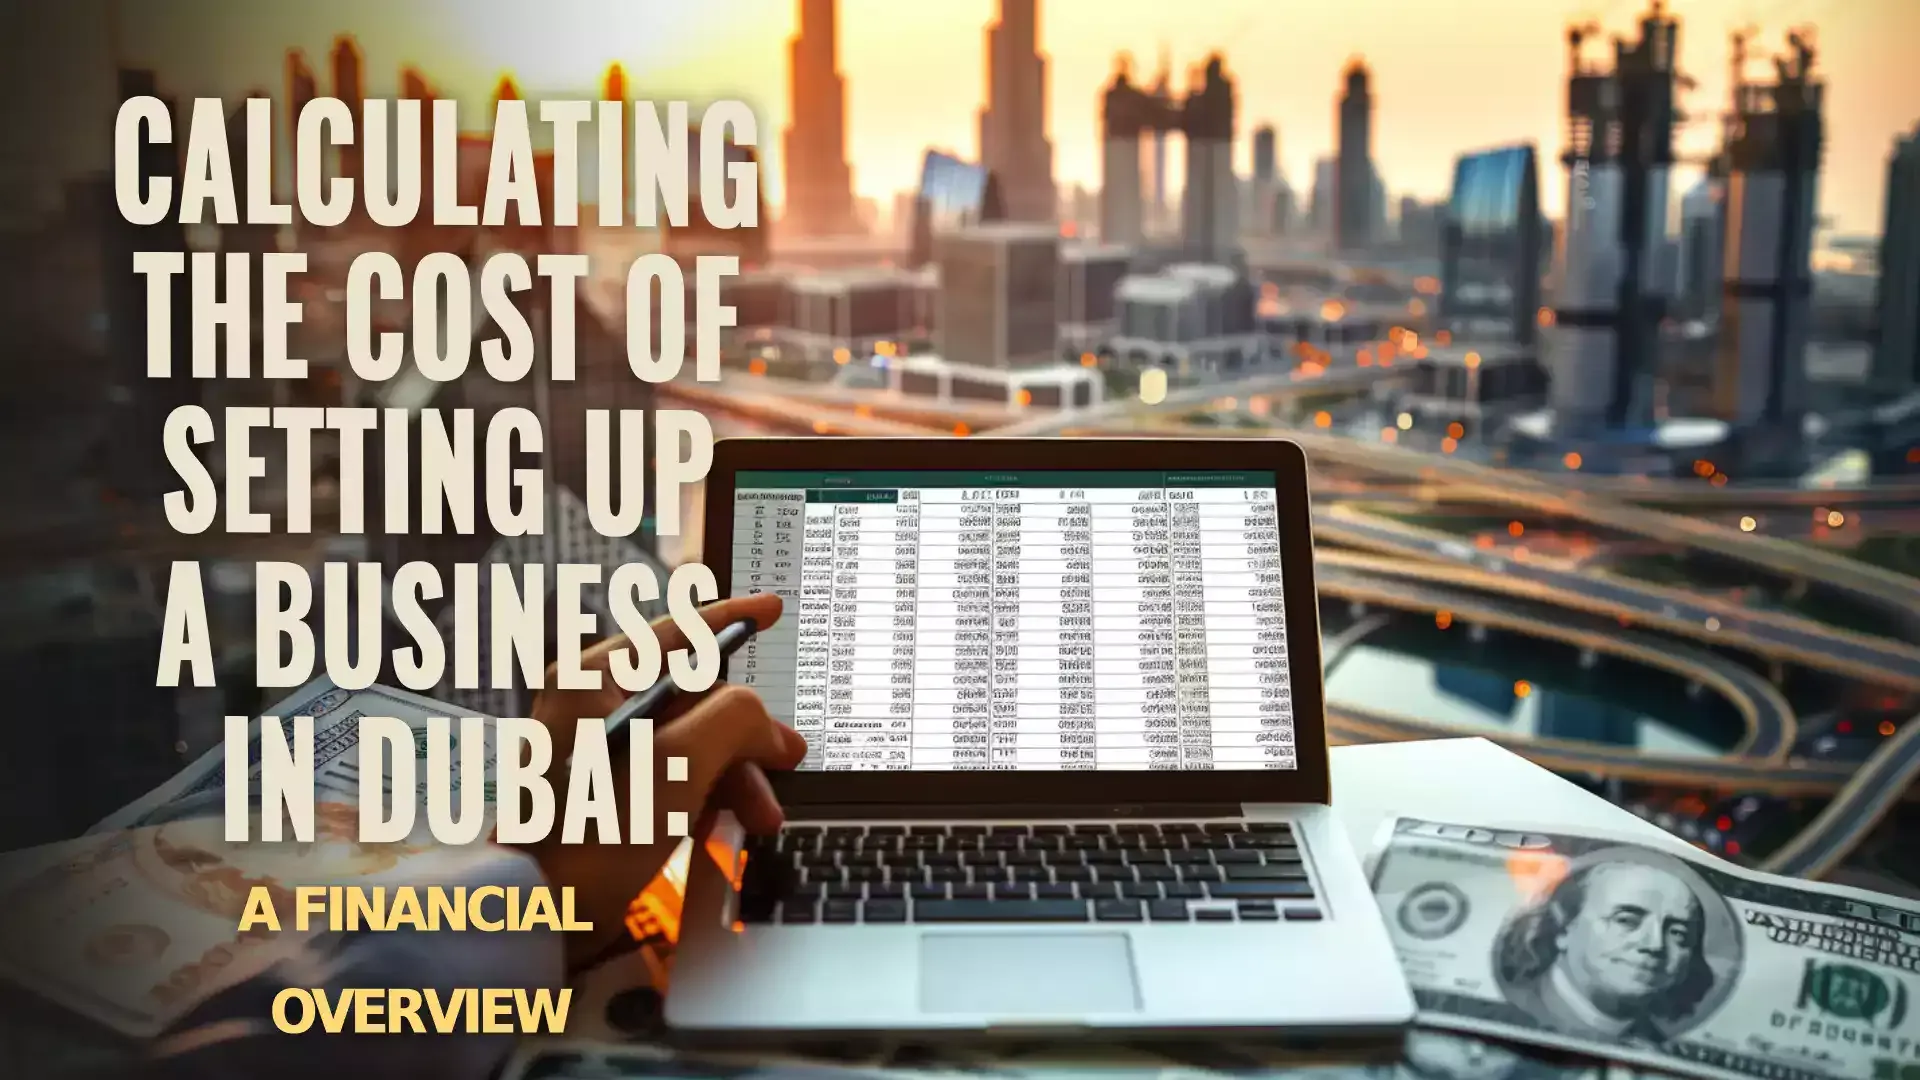 graphic representation illustrating the various expenses involved in setting up a business in Dubai, including licenses, permits, and infrastructure costs